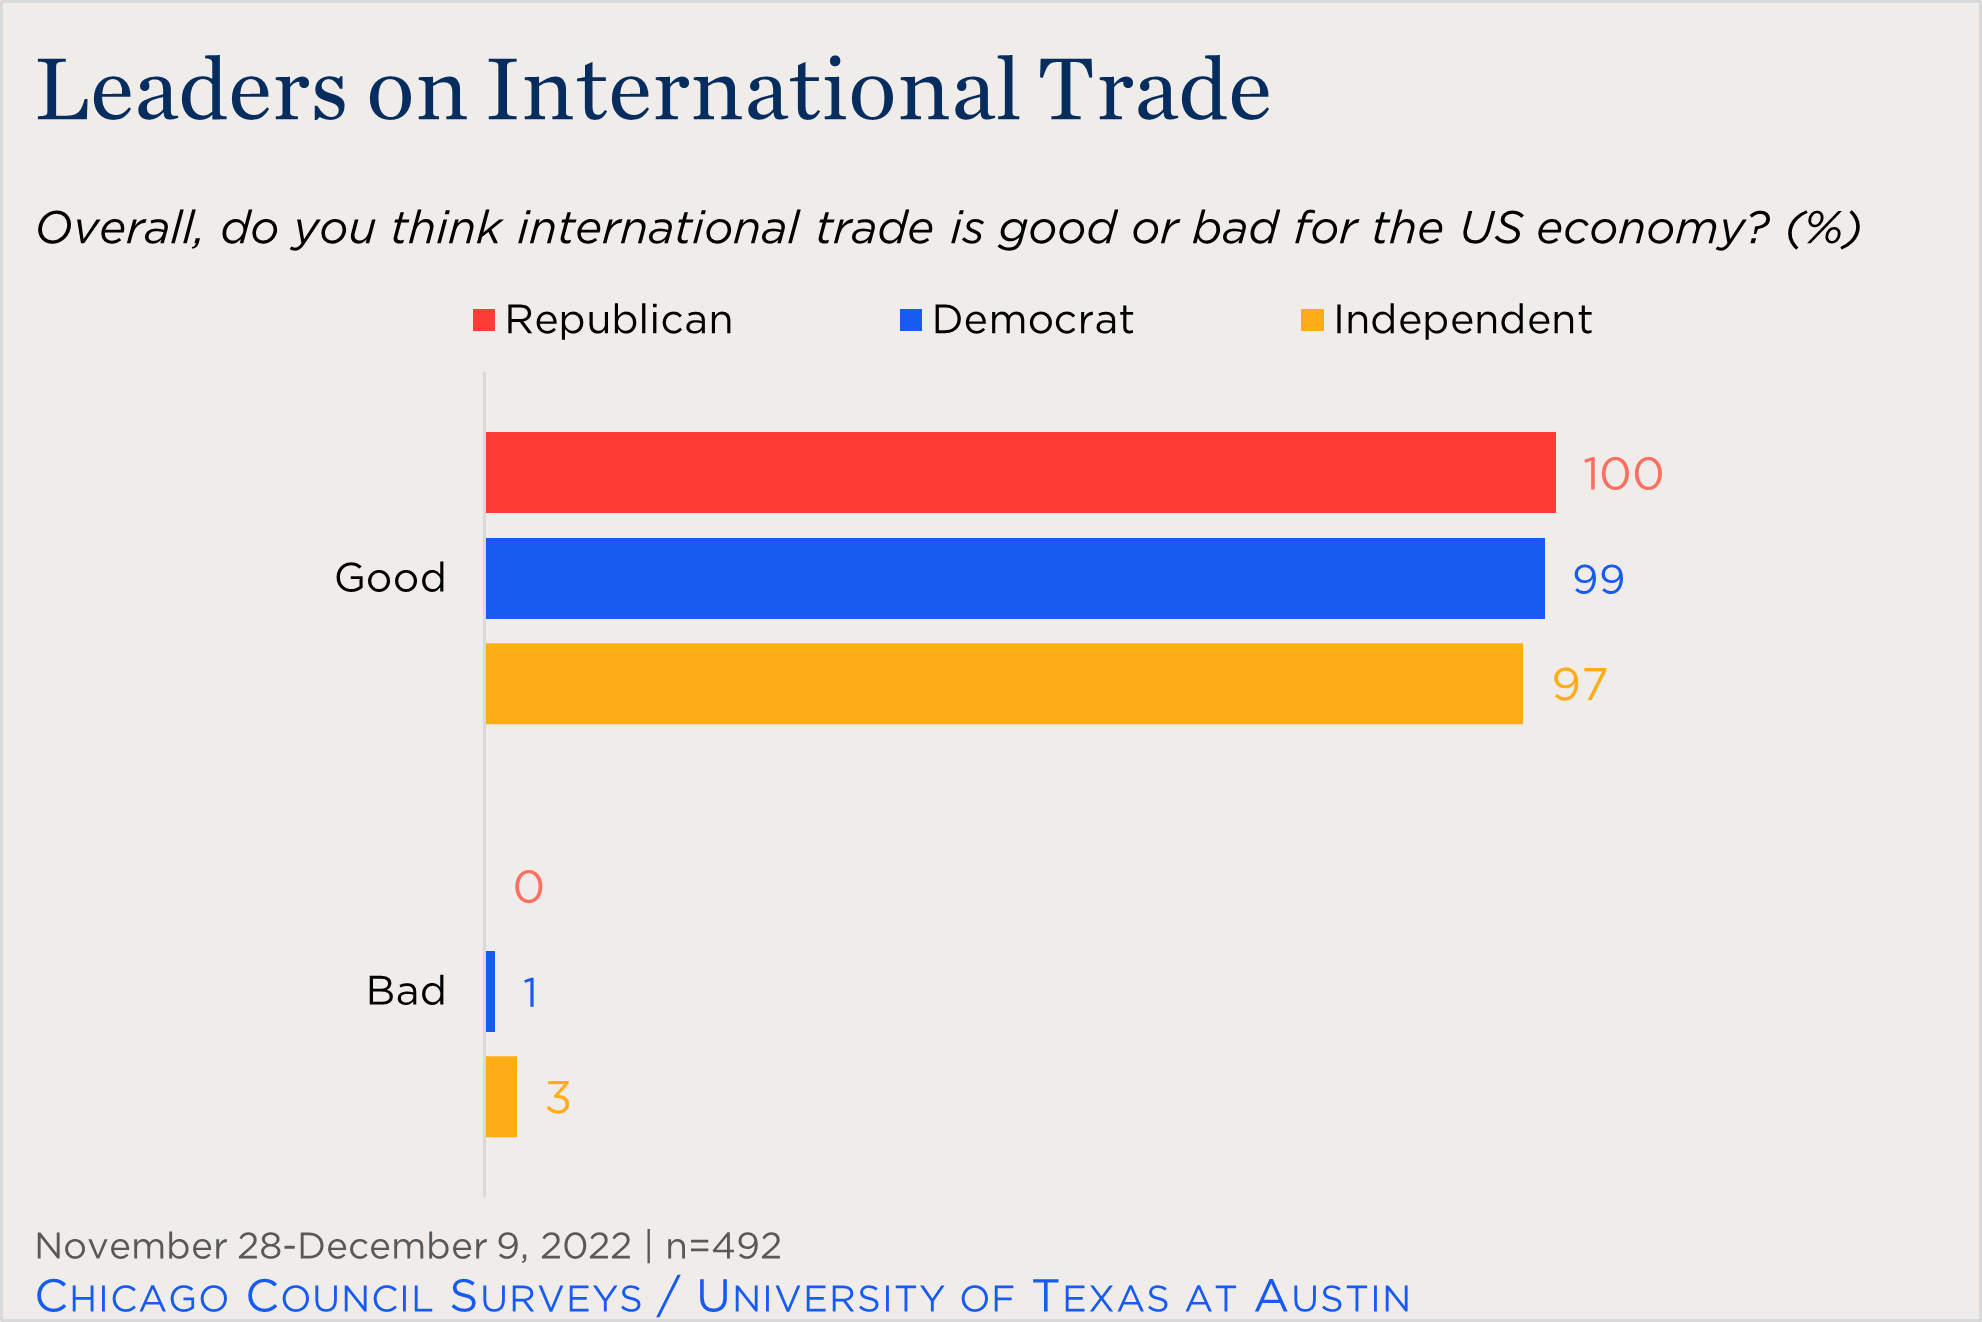 "bar chart showing leaders' view on international trade"